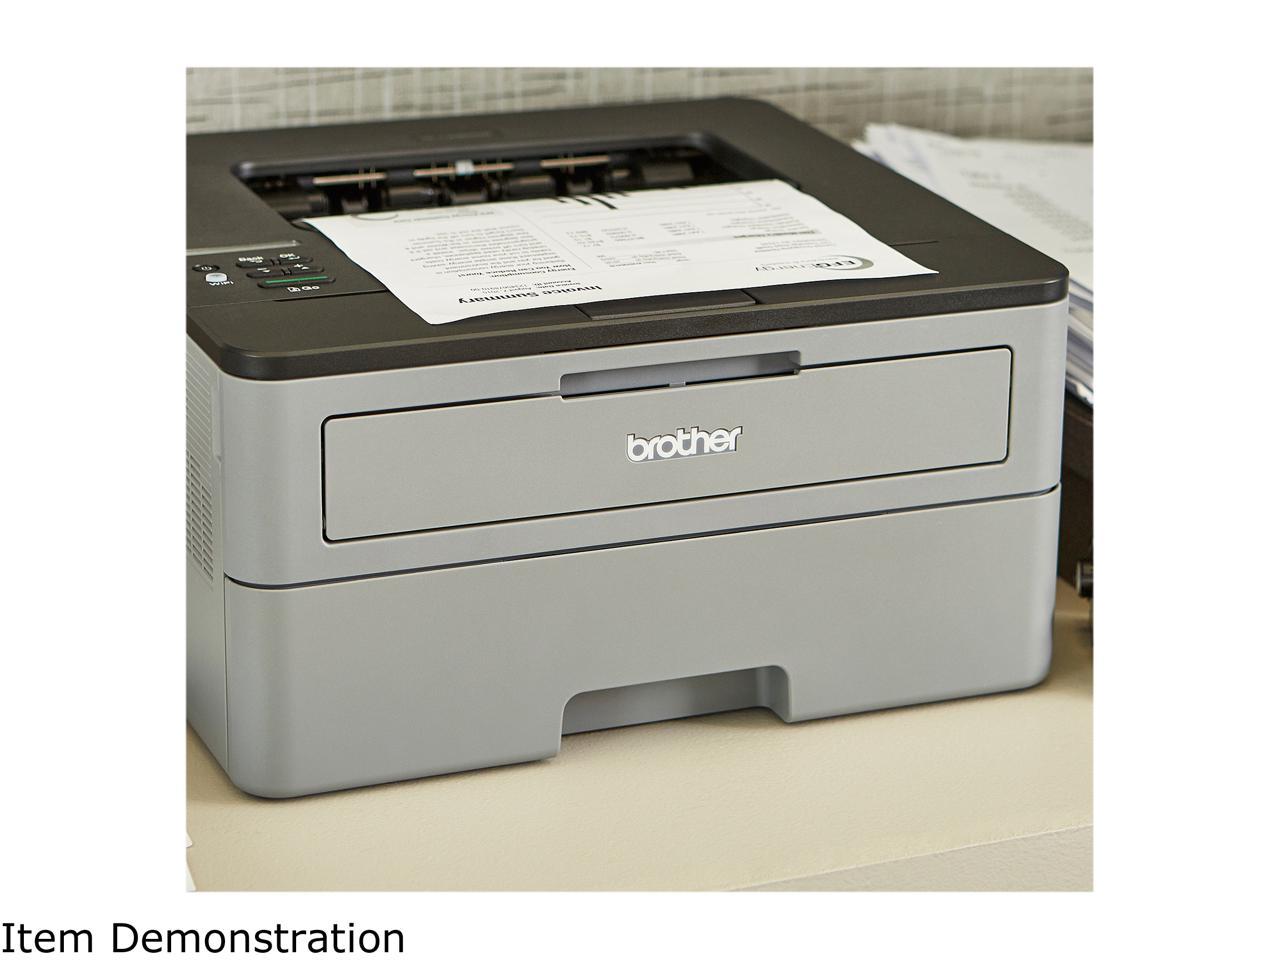 Brother HL-L2350DW Compact Monochrome Laser Printer with Wireless Printing and Duplex Two-Sided Printing